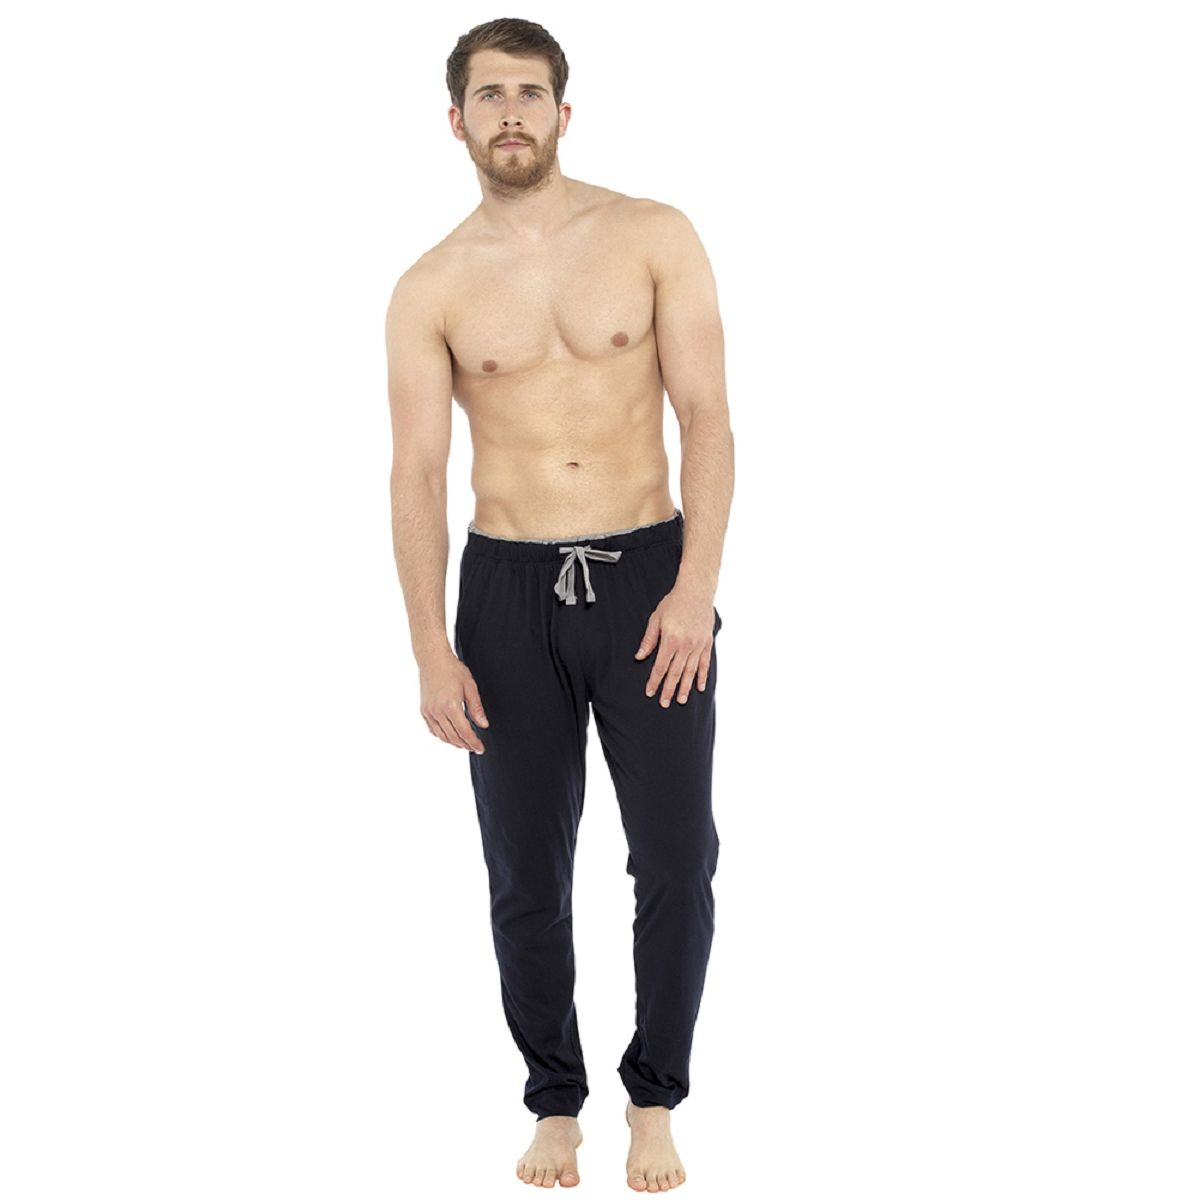 Mens Cuffed Ankle Lounge Pants with Contrast Inner Waistband ~ M-2XL